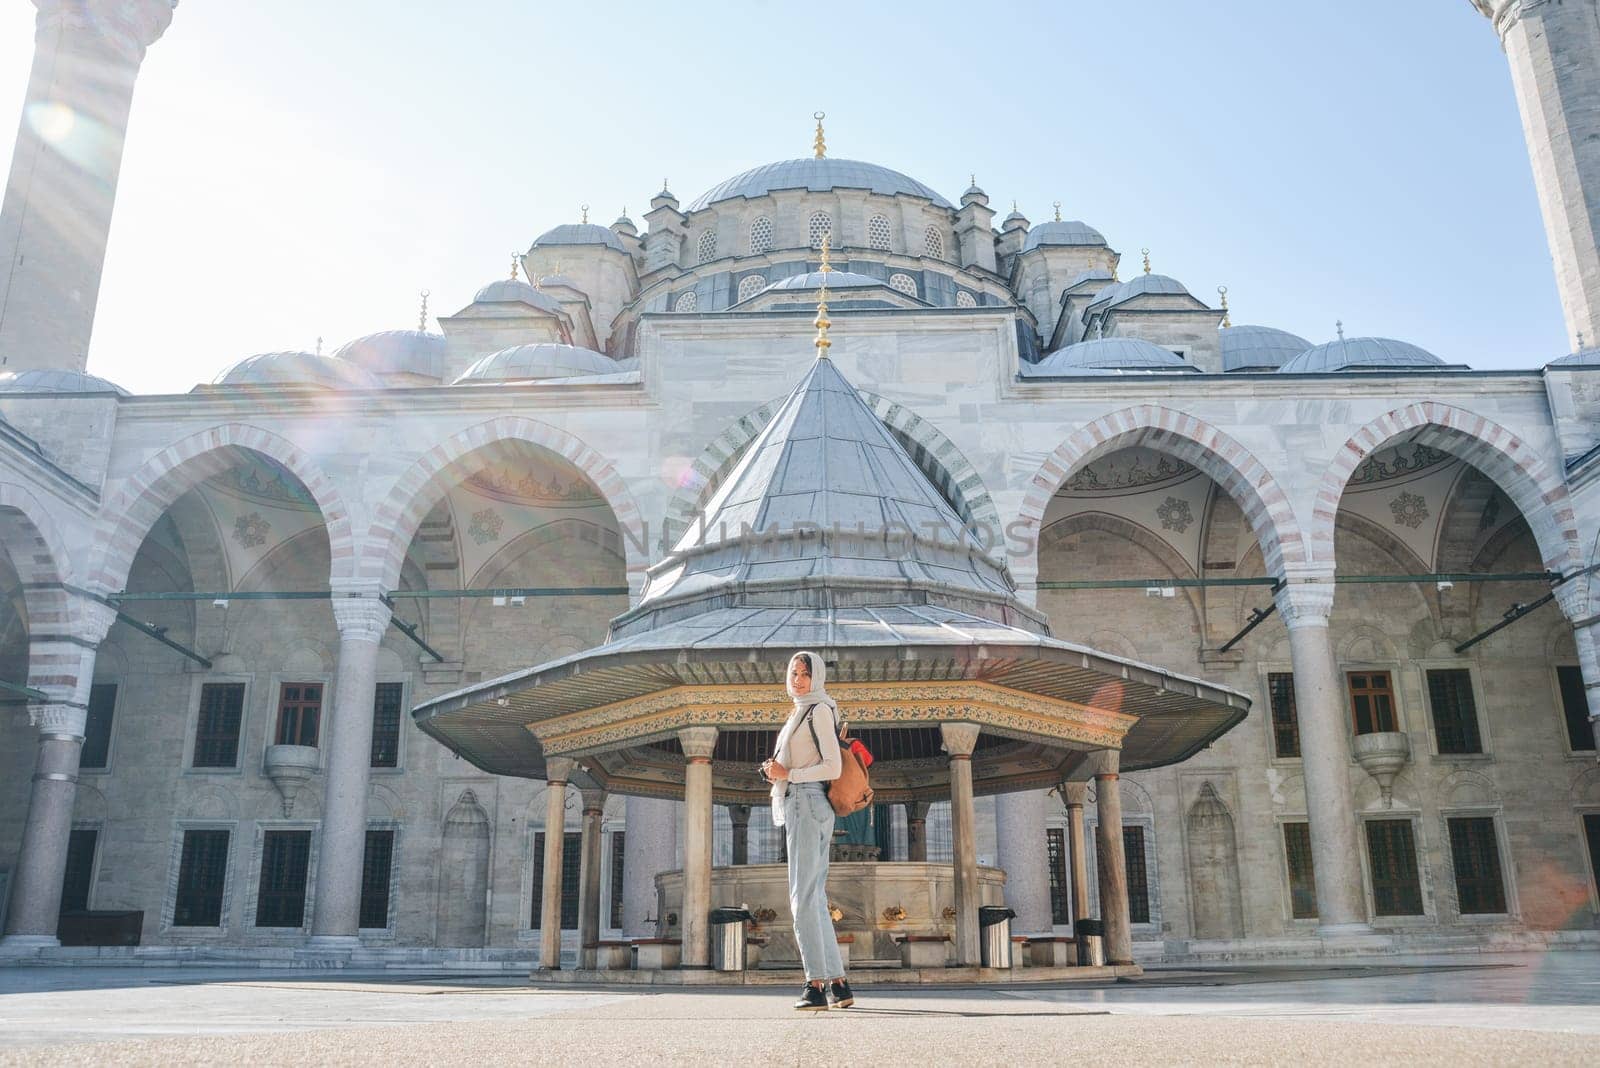 A young female traveler with a backpack on her back walks towards the Fatih Mosque in Istanbul by Ekaterina34